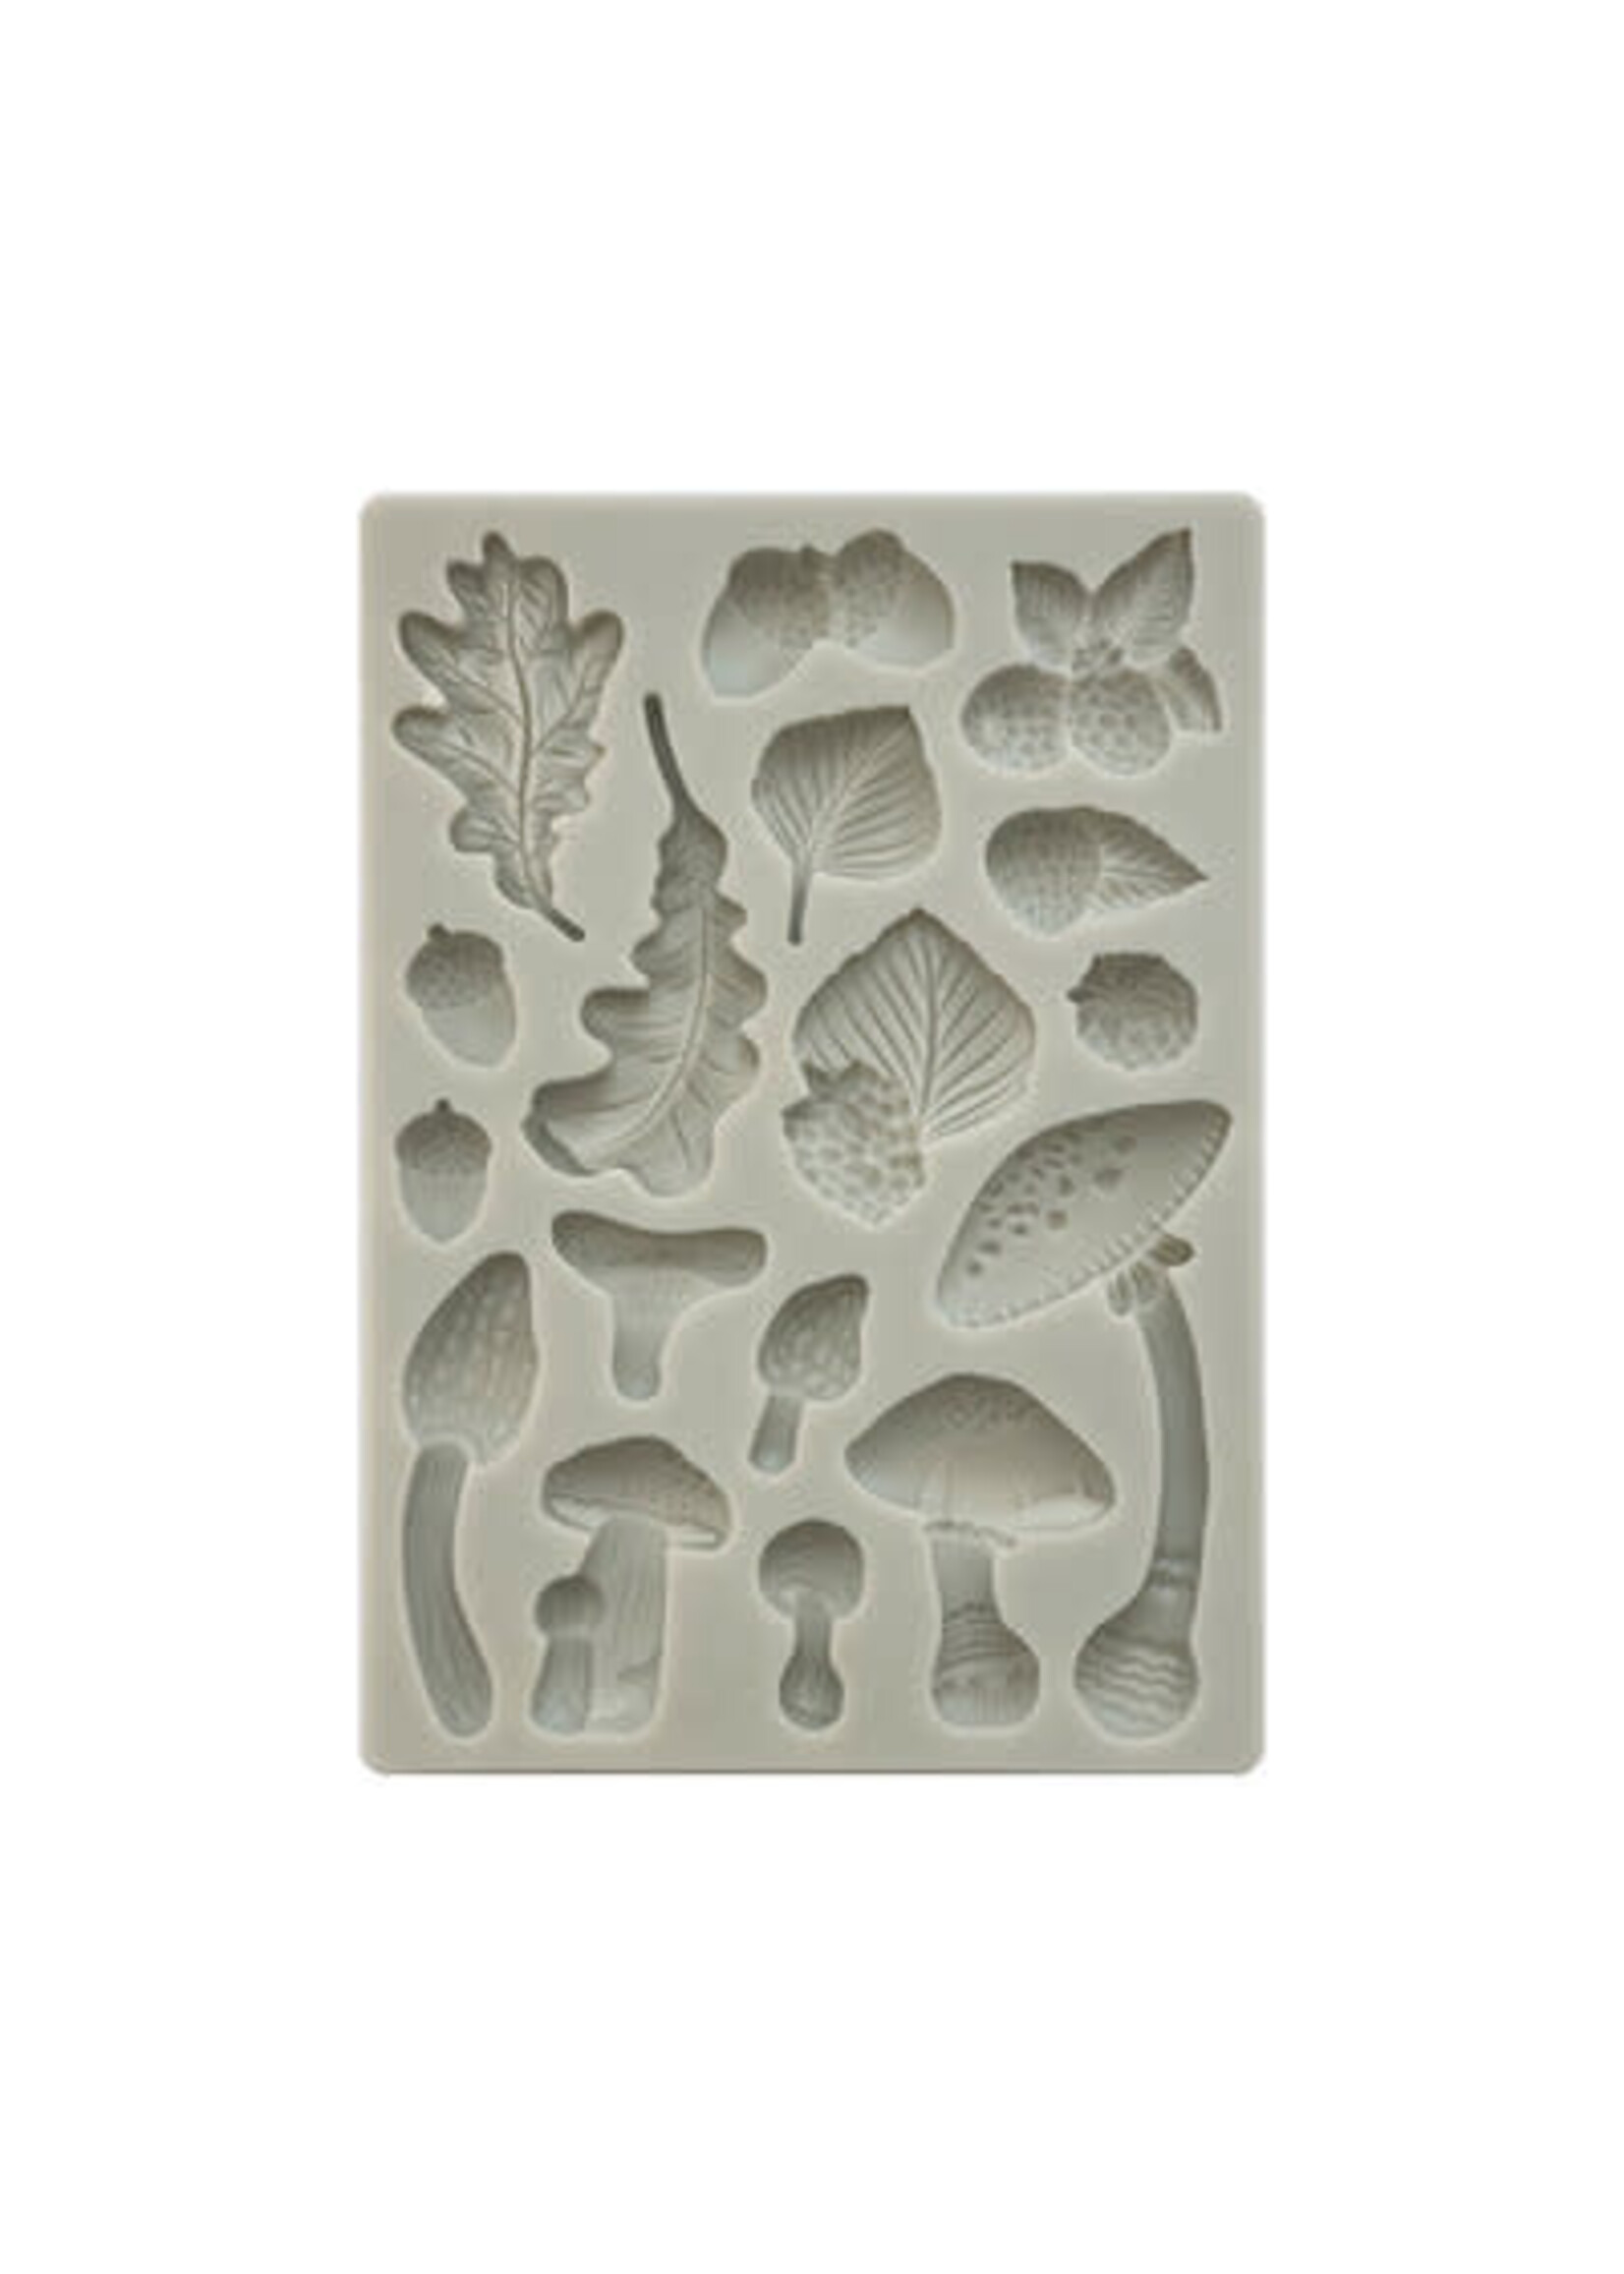 Stamperia SILICON MOLD A5 - WOODLAND MUSHROOMS